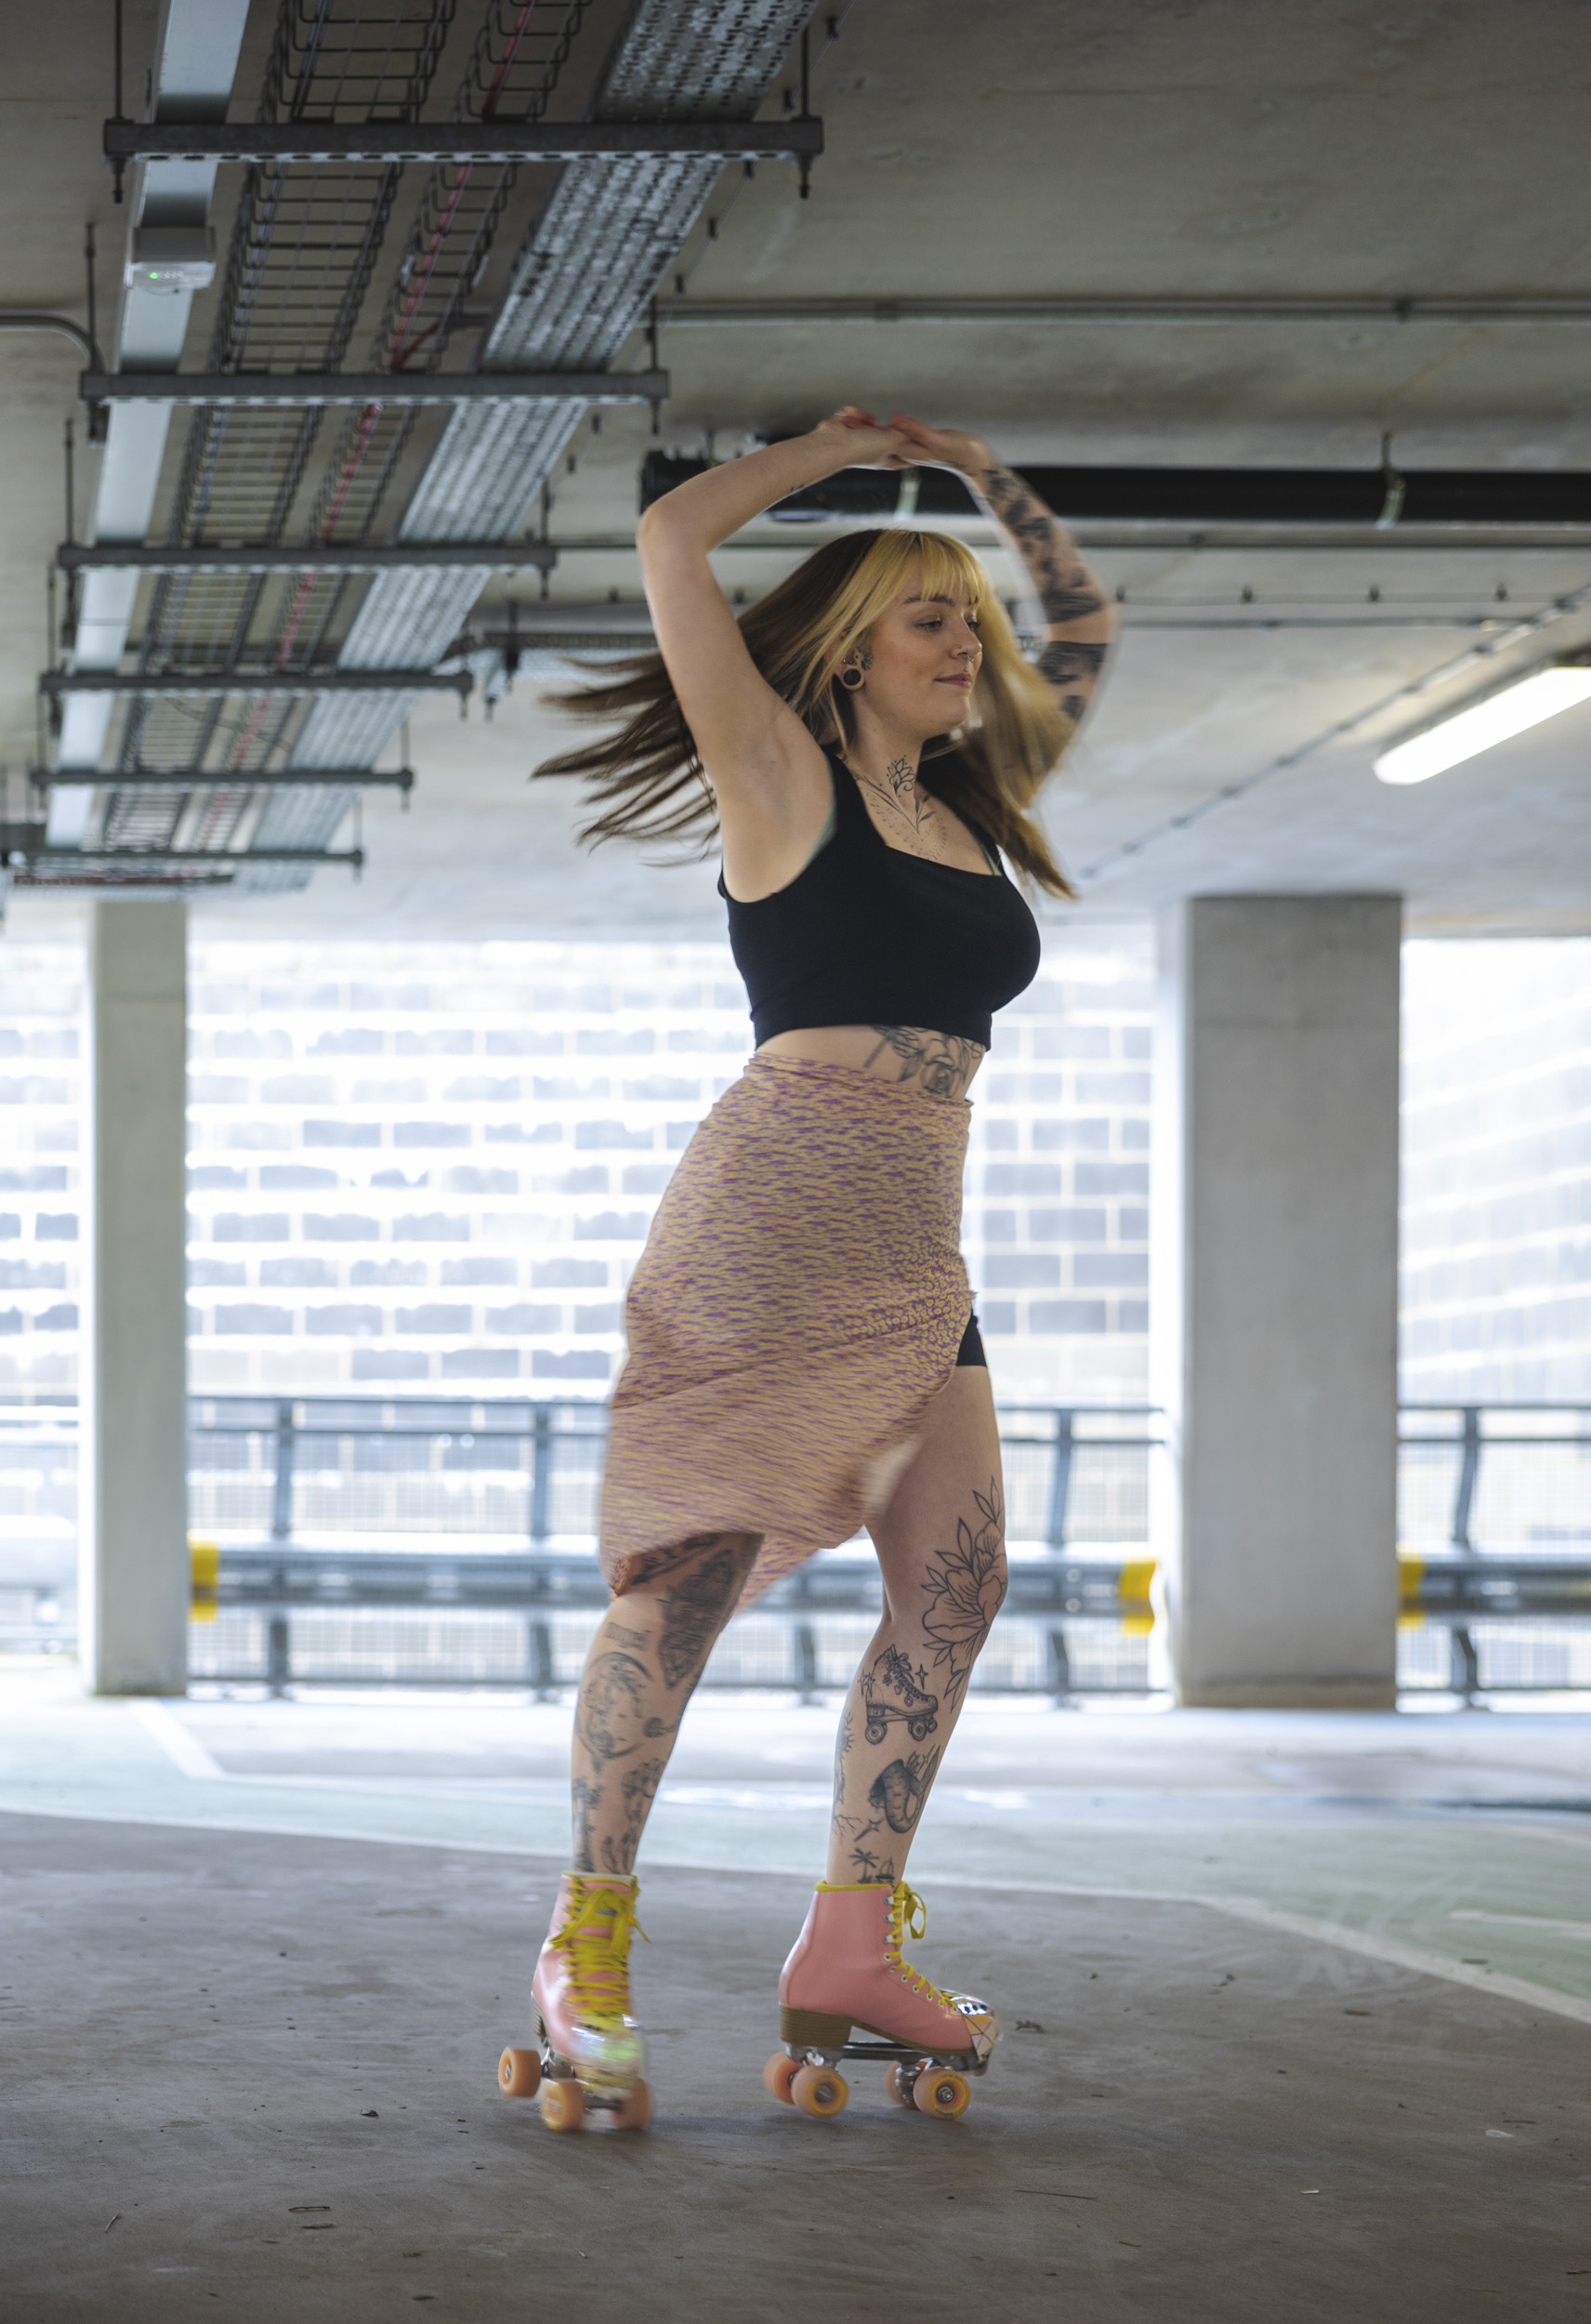 Canon EOS R8 sample image of a rollerskater in action dark lighting